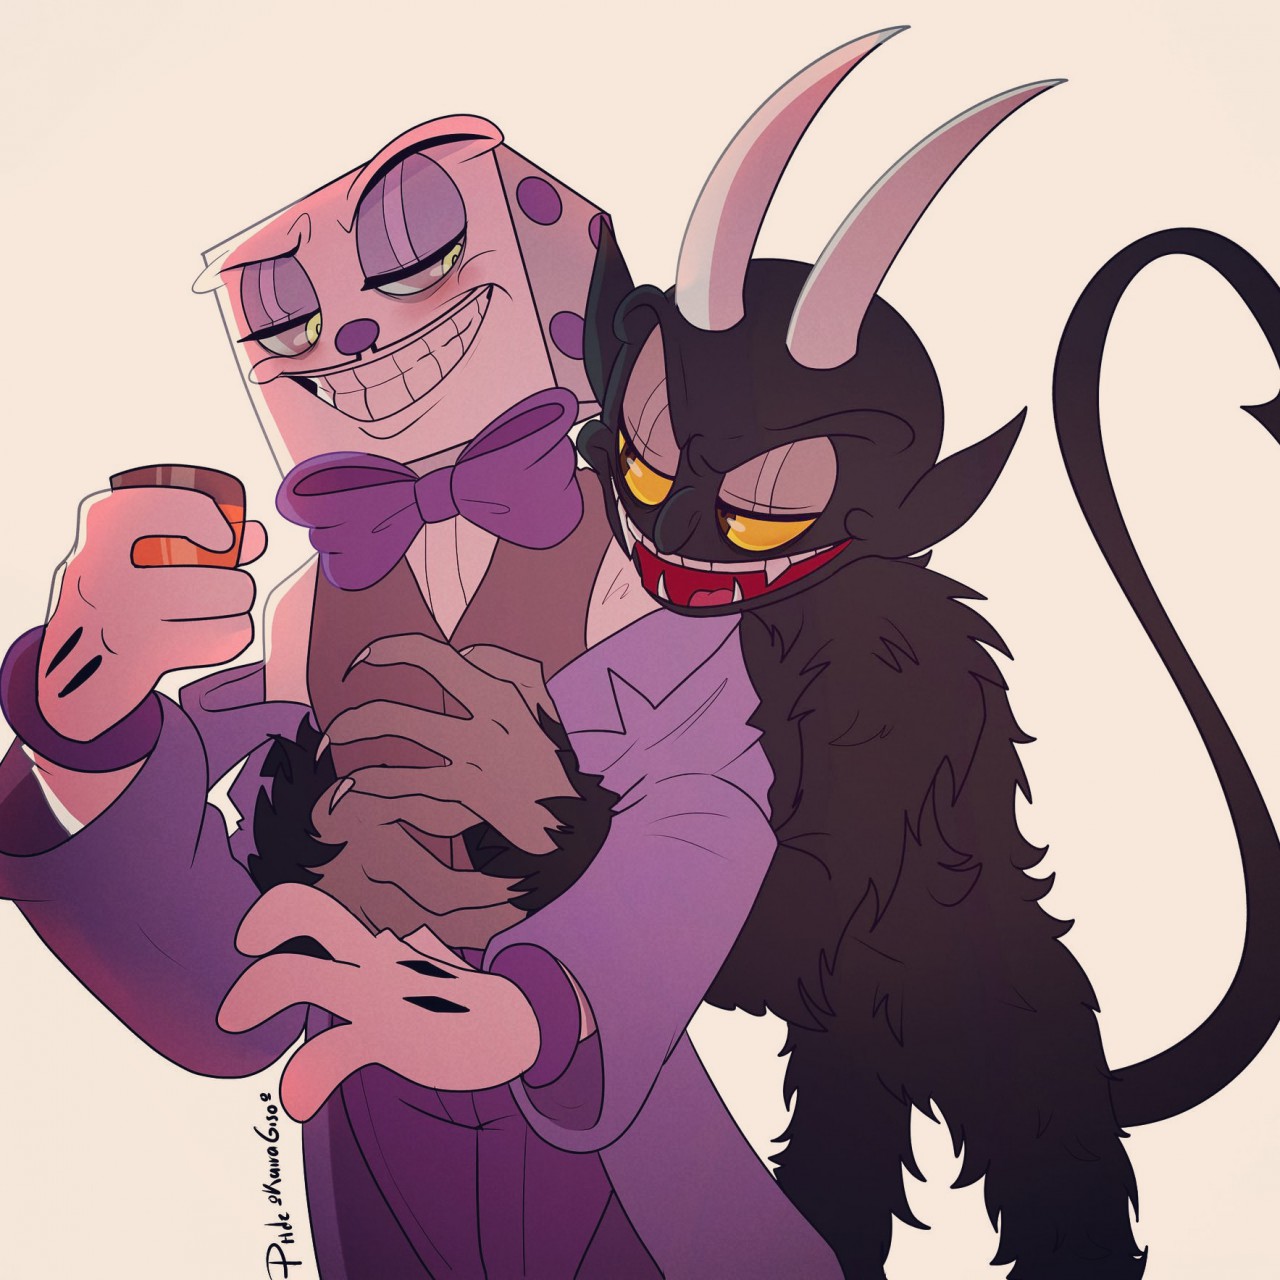 King Dice and The devil by oKairaGiso -- Fur Affinity [dot] net